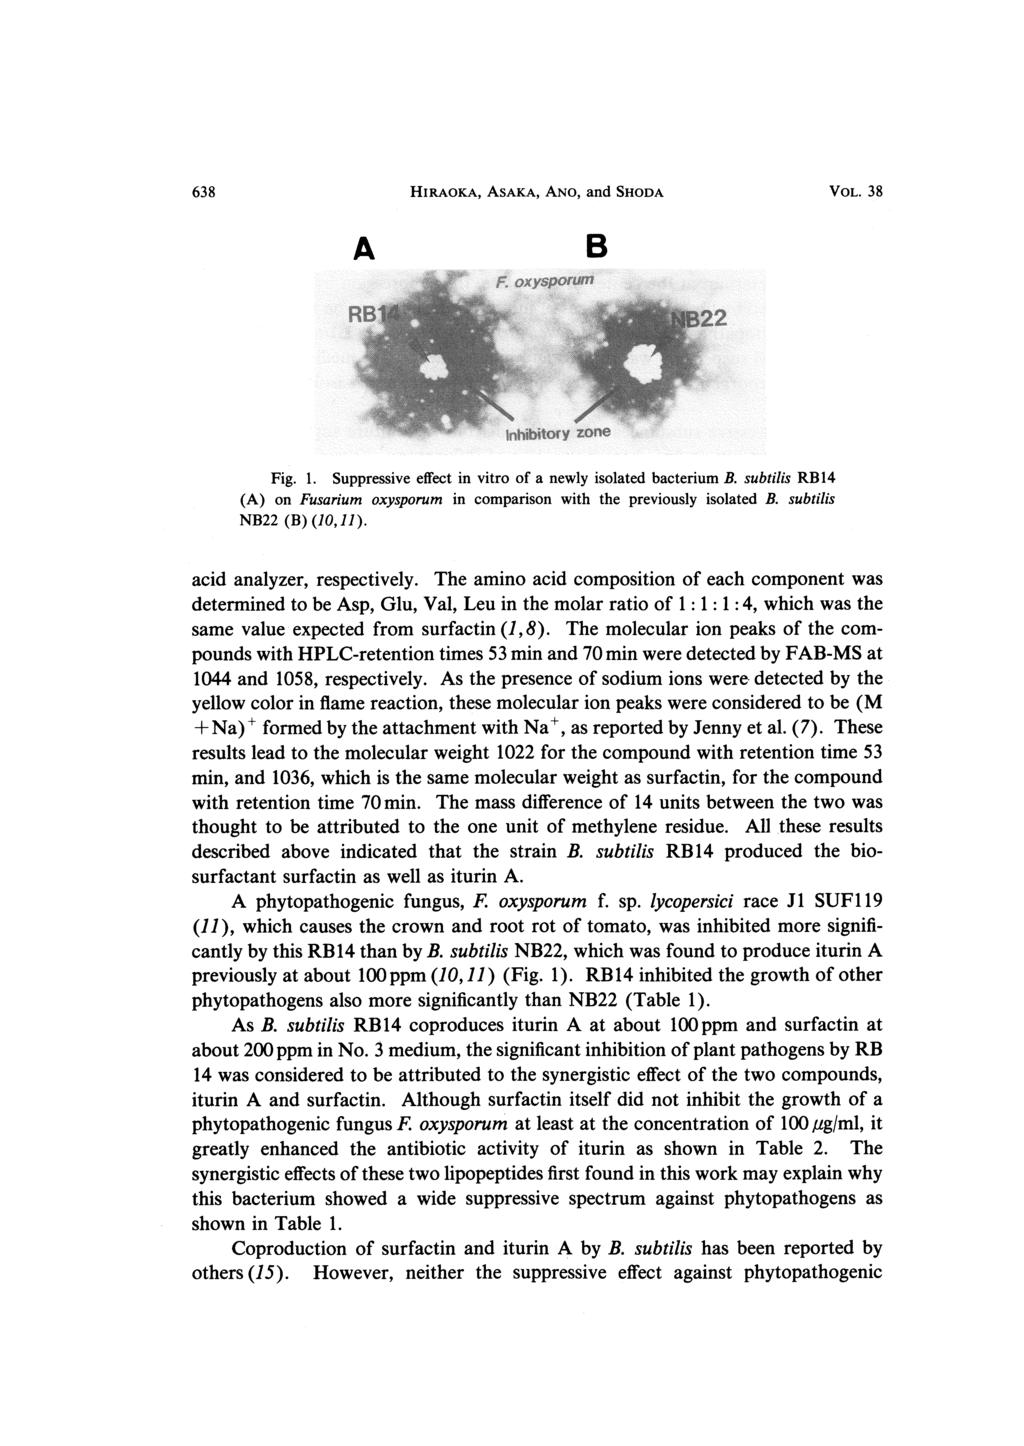 638 HIRAOKA, ASAKA, ANO, and SHODA VOL. 38 Fig. 1. Suppressive effect in vitro of a newly isolated bacterium B. subtilis RB 14 (A) on Fusarium oxysporum in comparison with the previously isolated B.